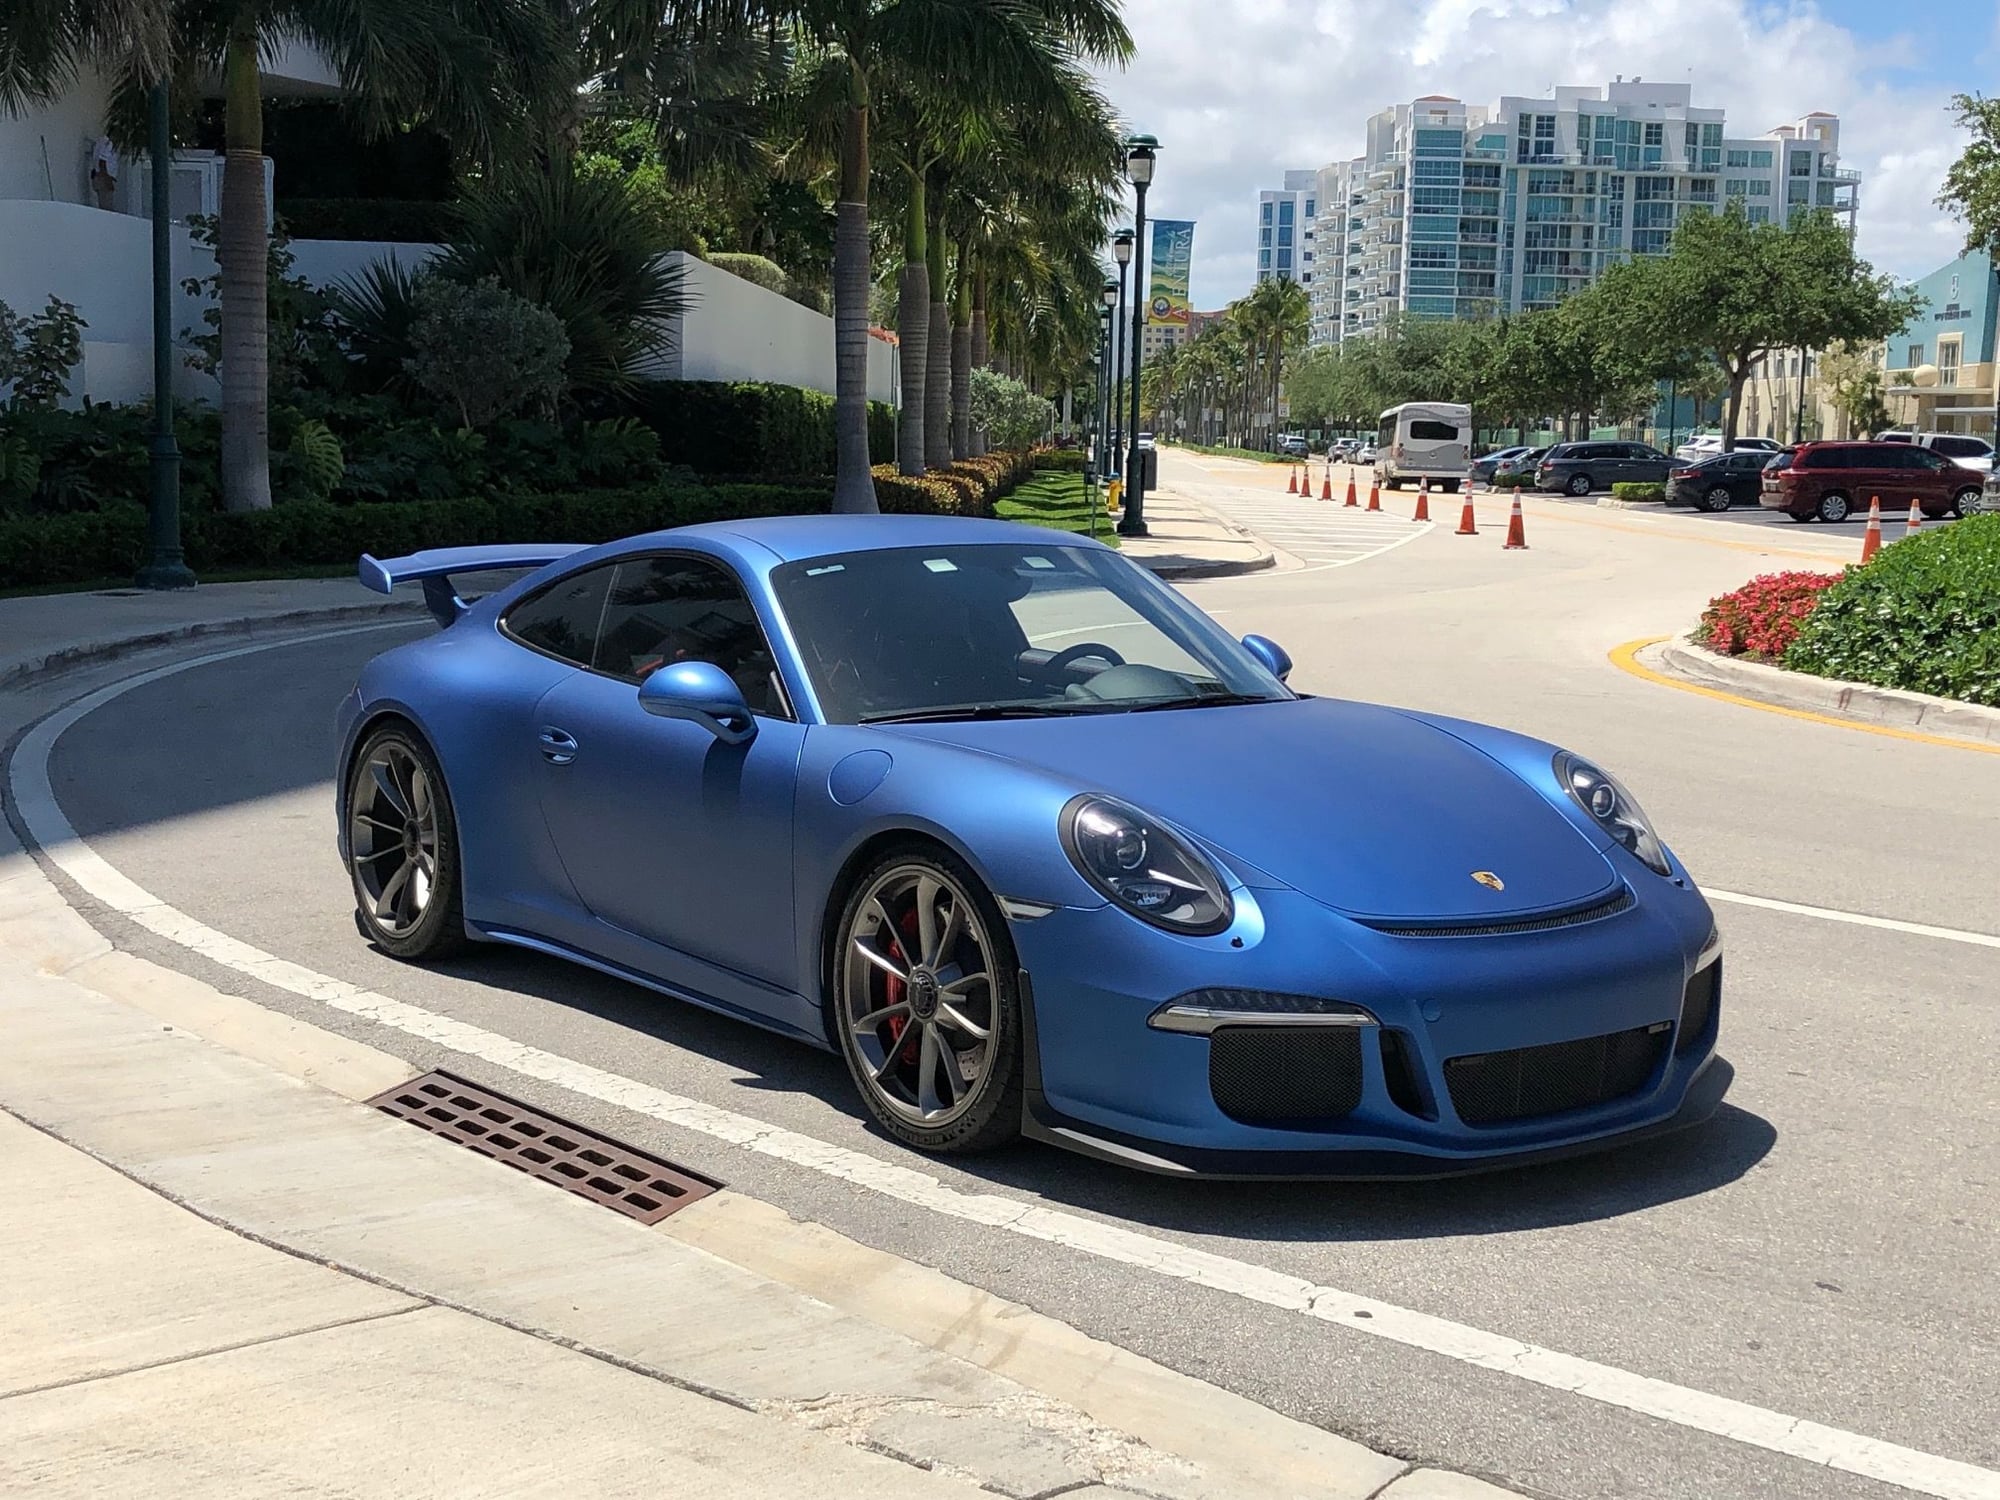 2015 Porsche GT3 - GT3 for a track enthusiast! - Used - VIN WPOAC2A98FS189093 - 15,500 Miles - 6 cyl - 2WD - Automatic - Coupe - Blue - Miami, FL 33180, United States